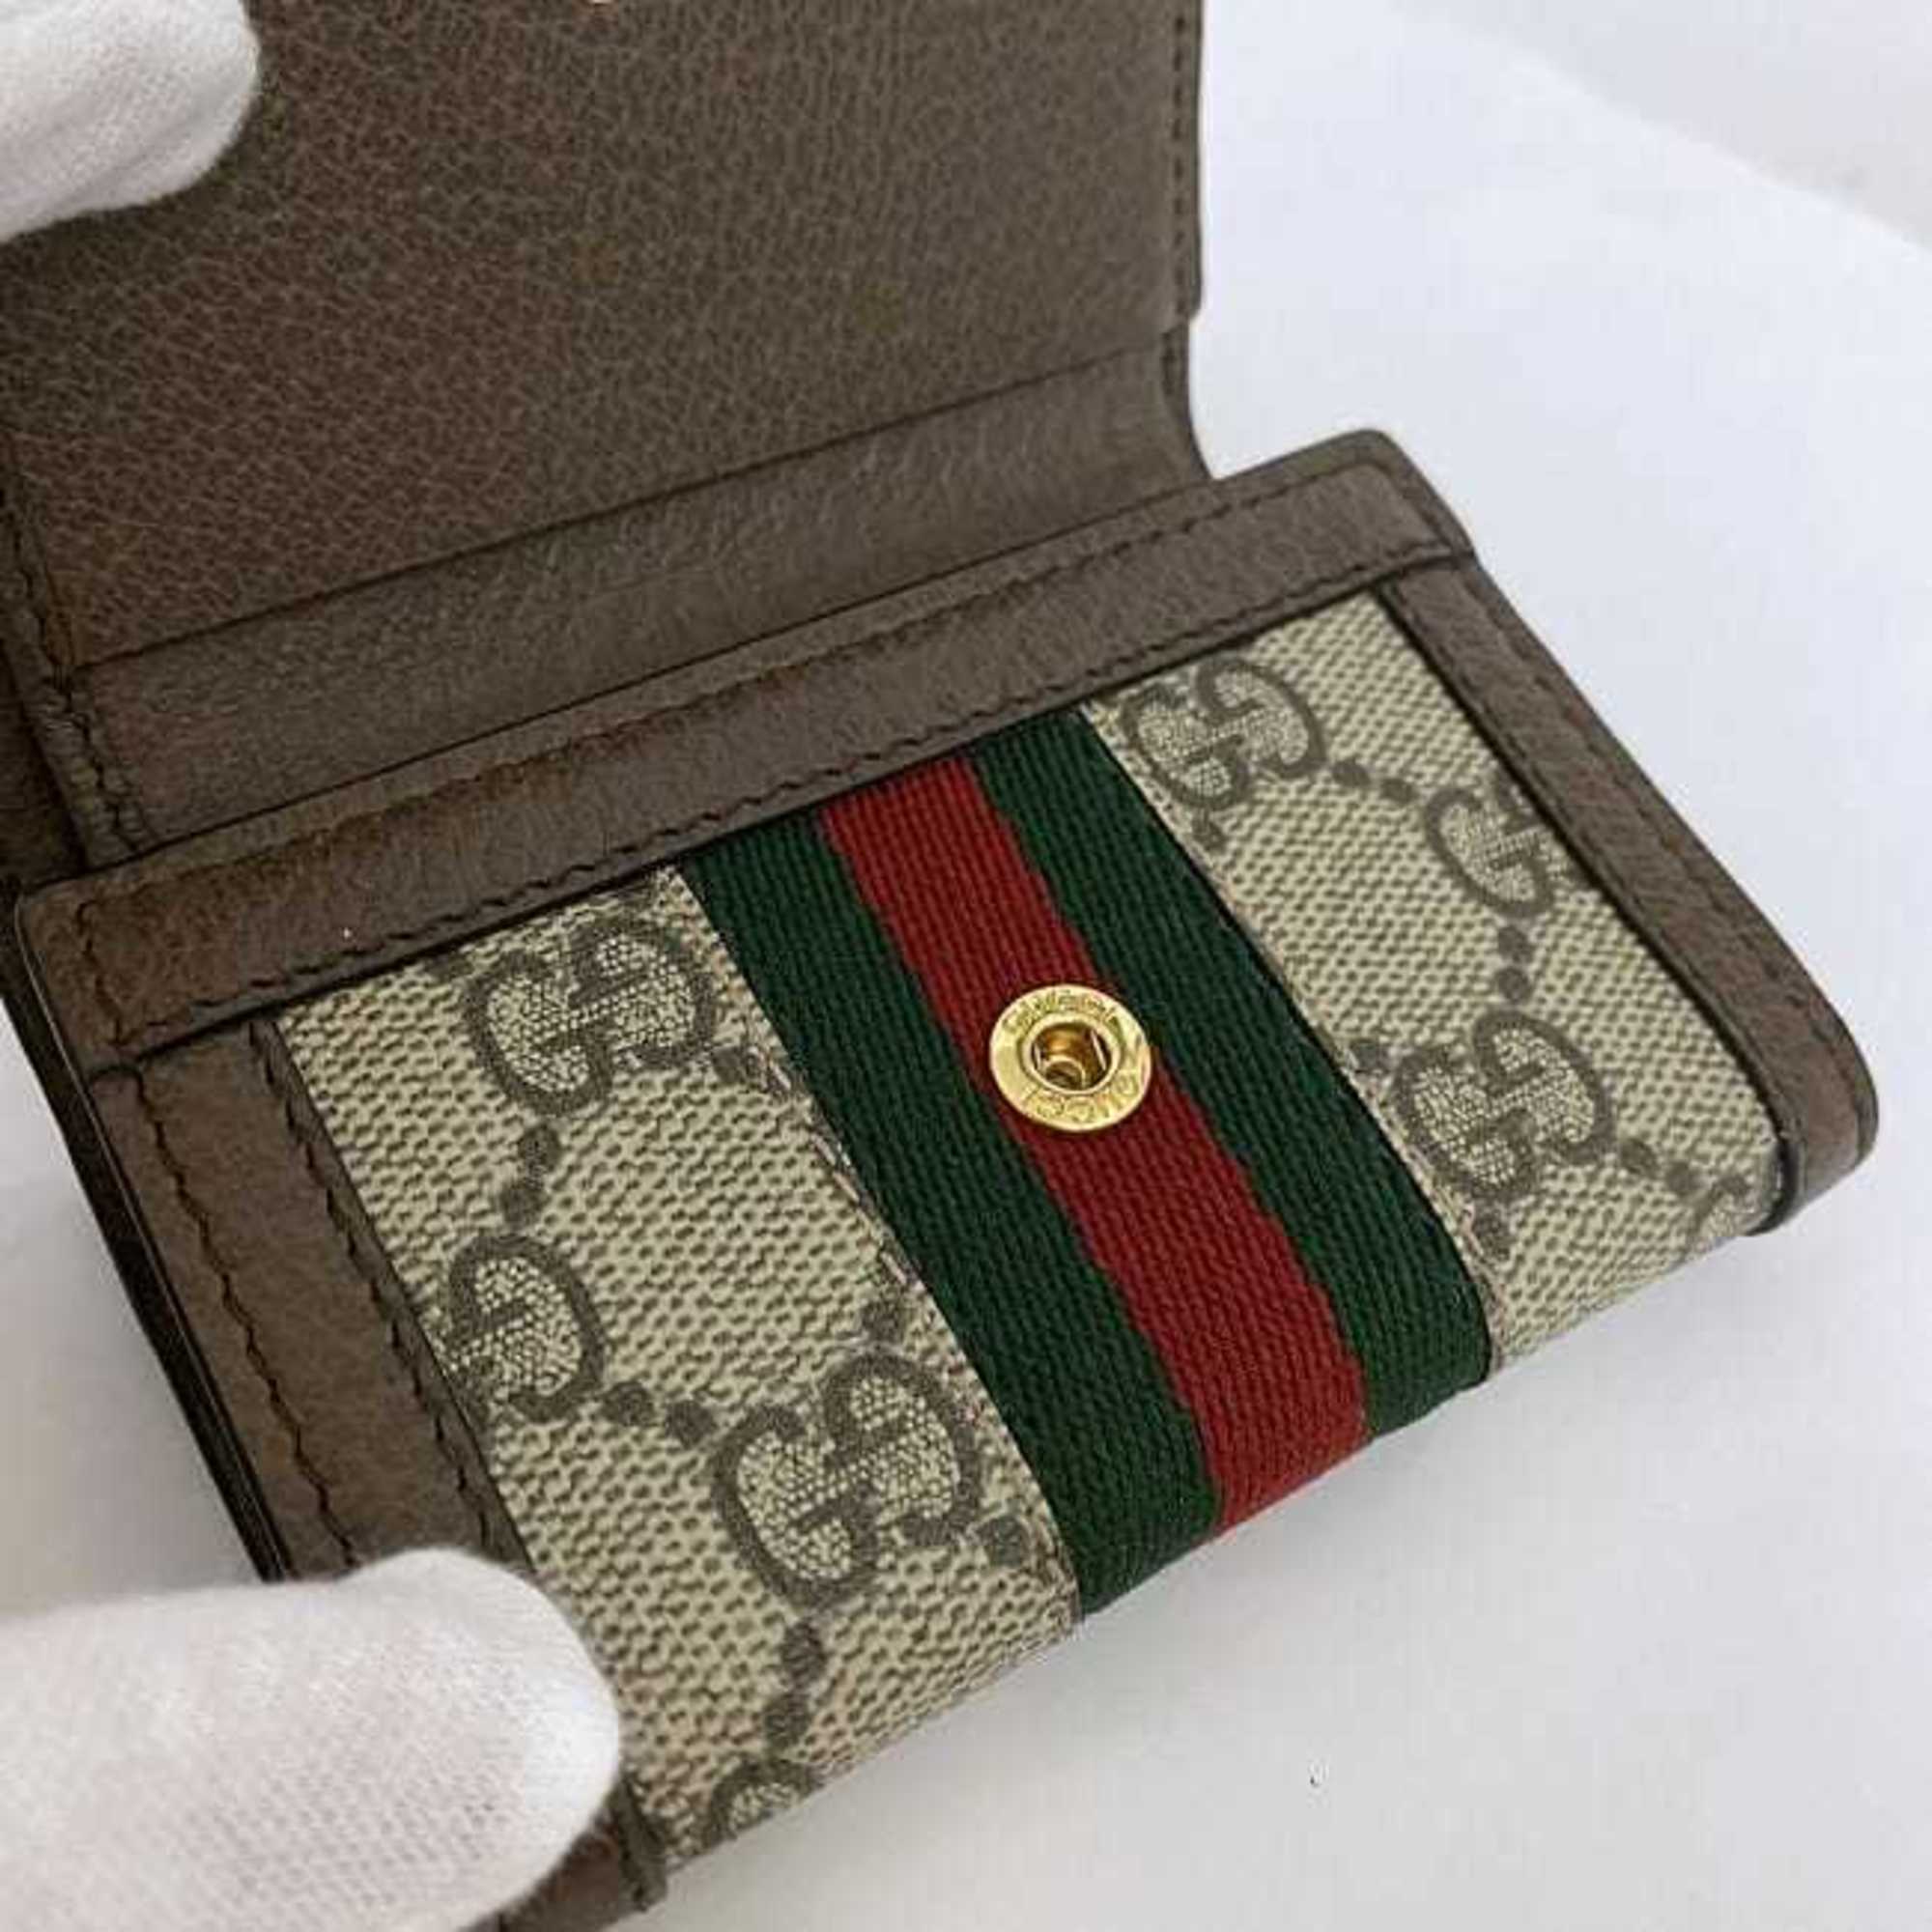 Gucci Trifold Wallet Beige Brown GG Marmont Sherry 644334 PVC Canvas Leather GUCCI L-shaped Compact Ladies